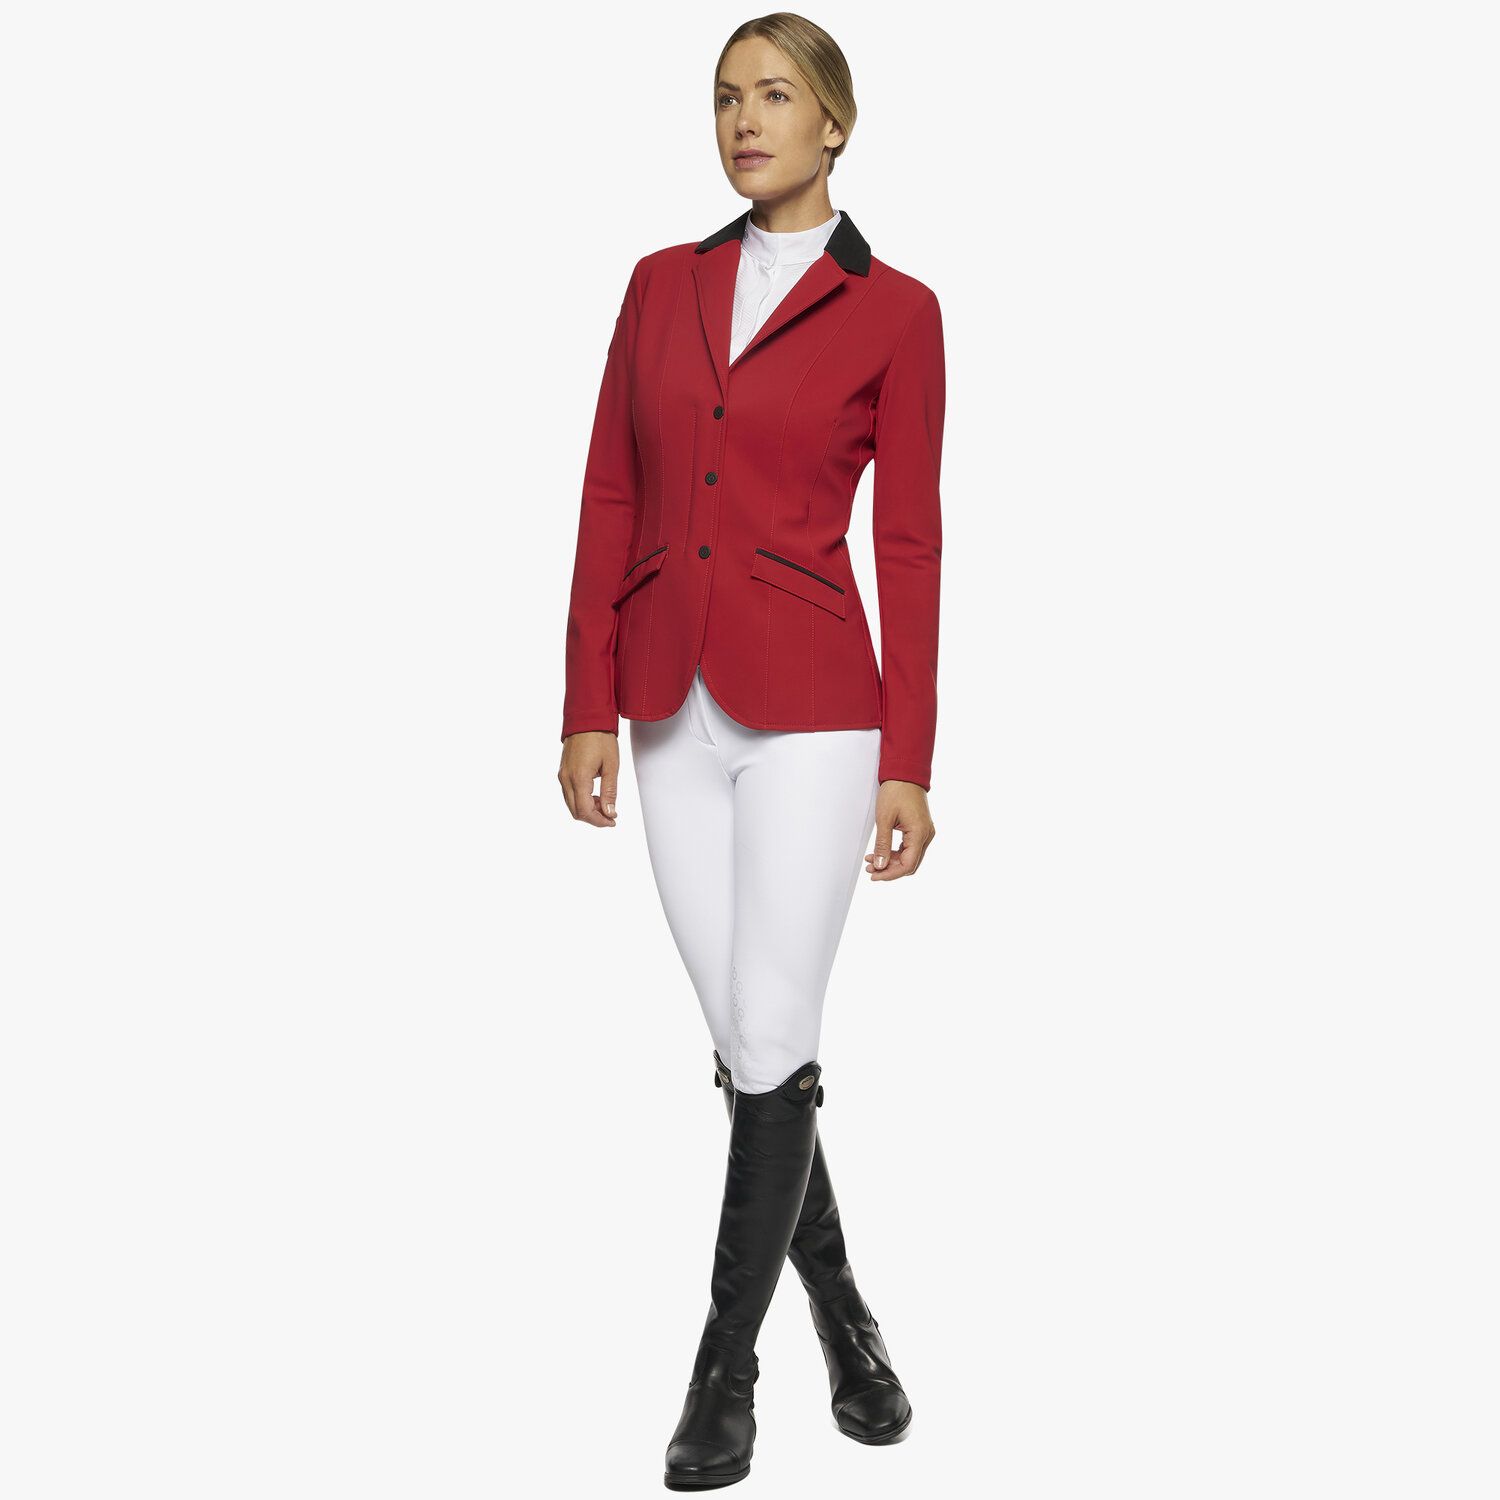 Cavalleria Toscana Women's zip and buttons riding jacket RED-4